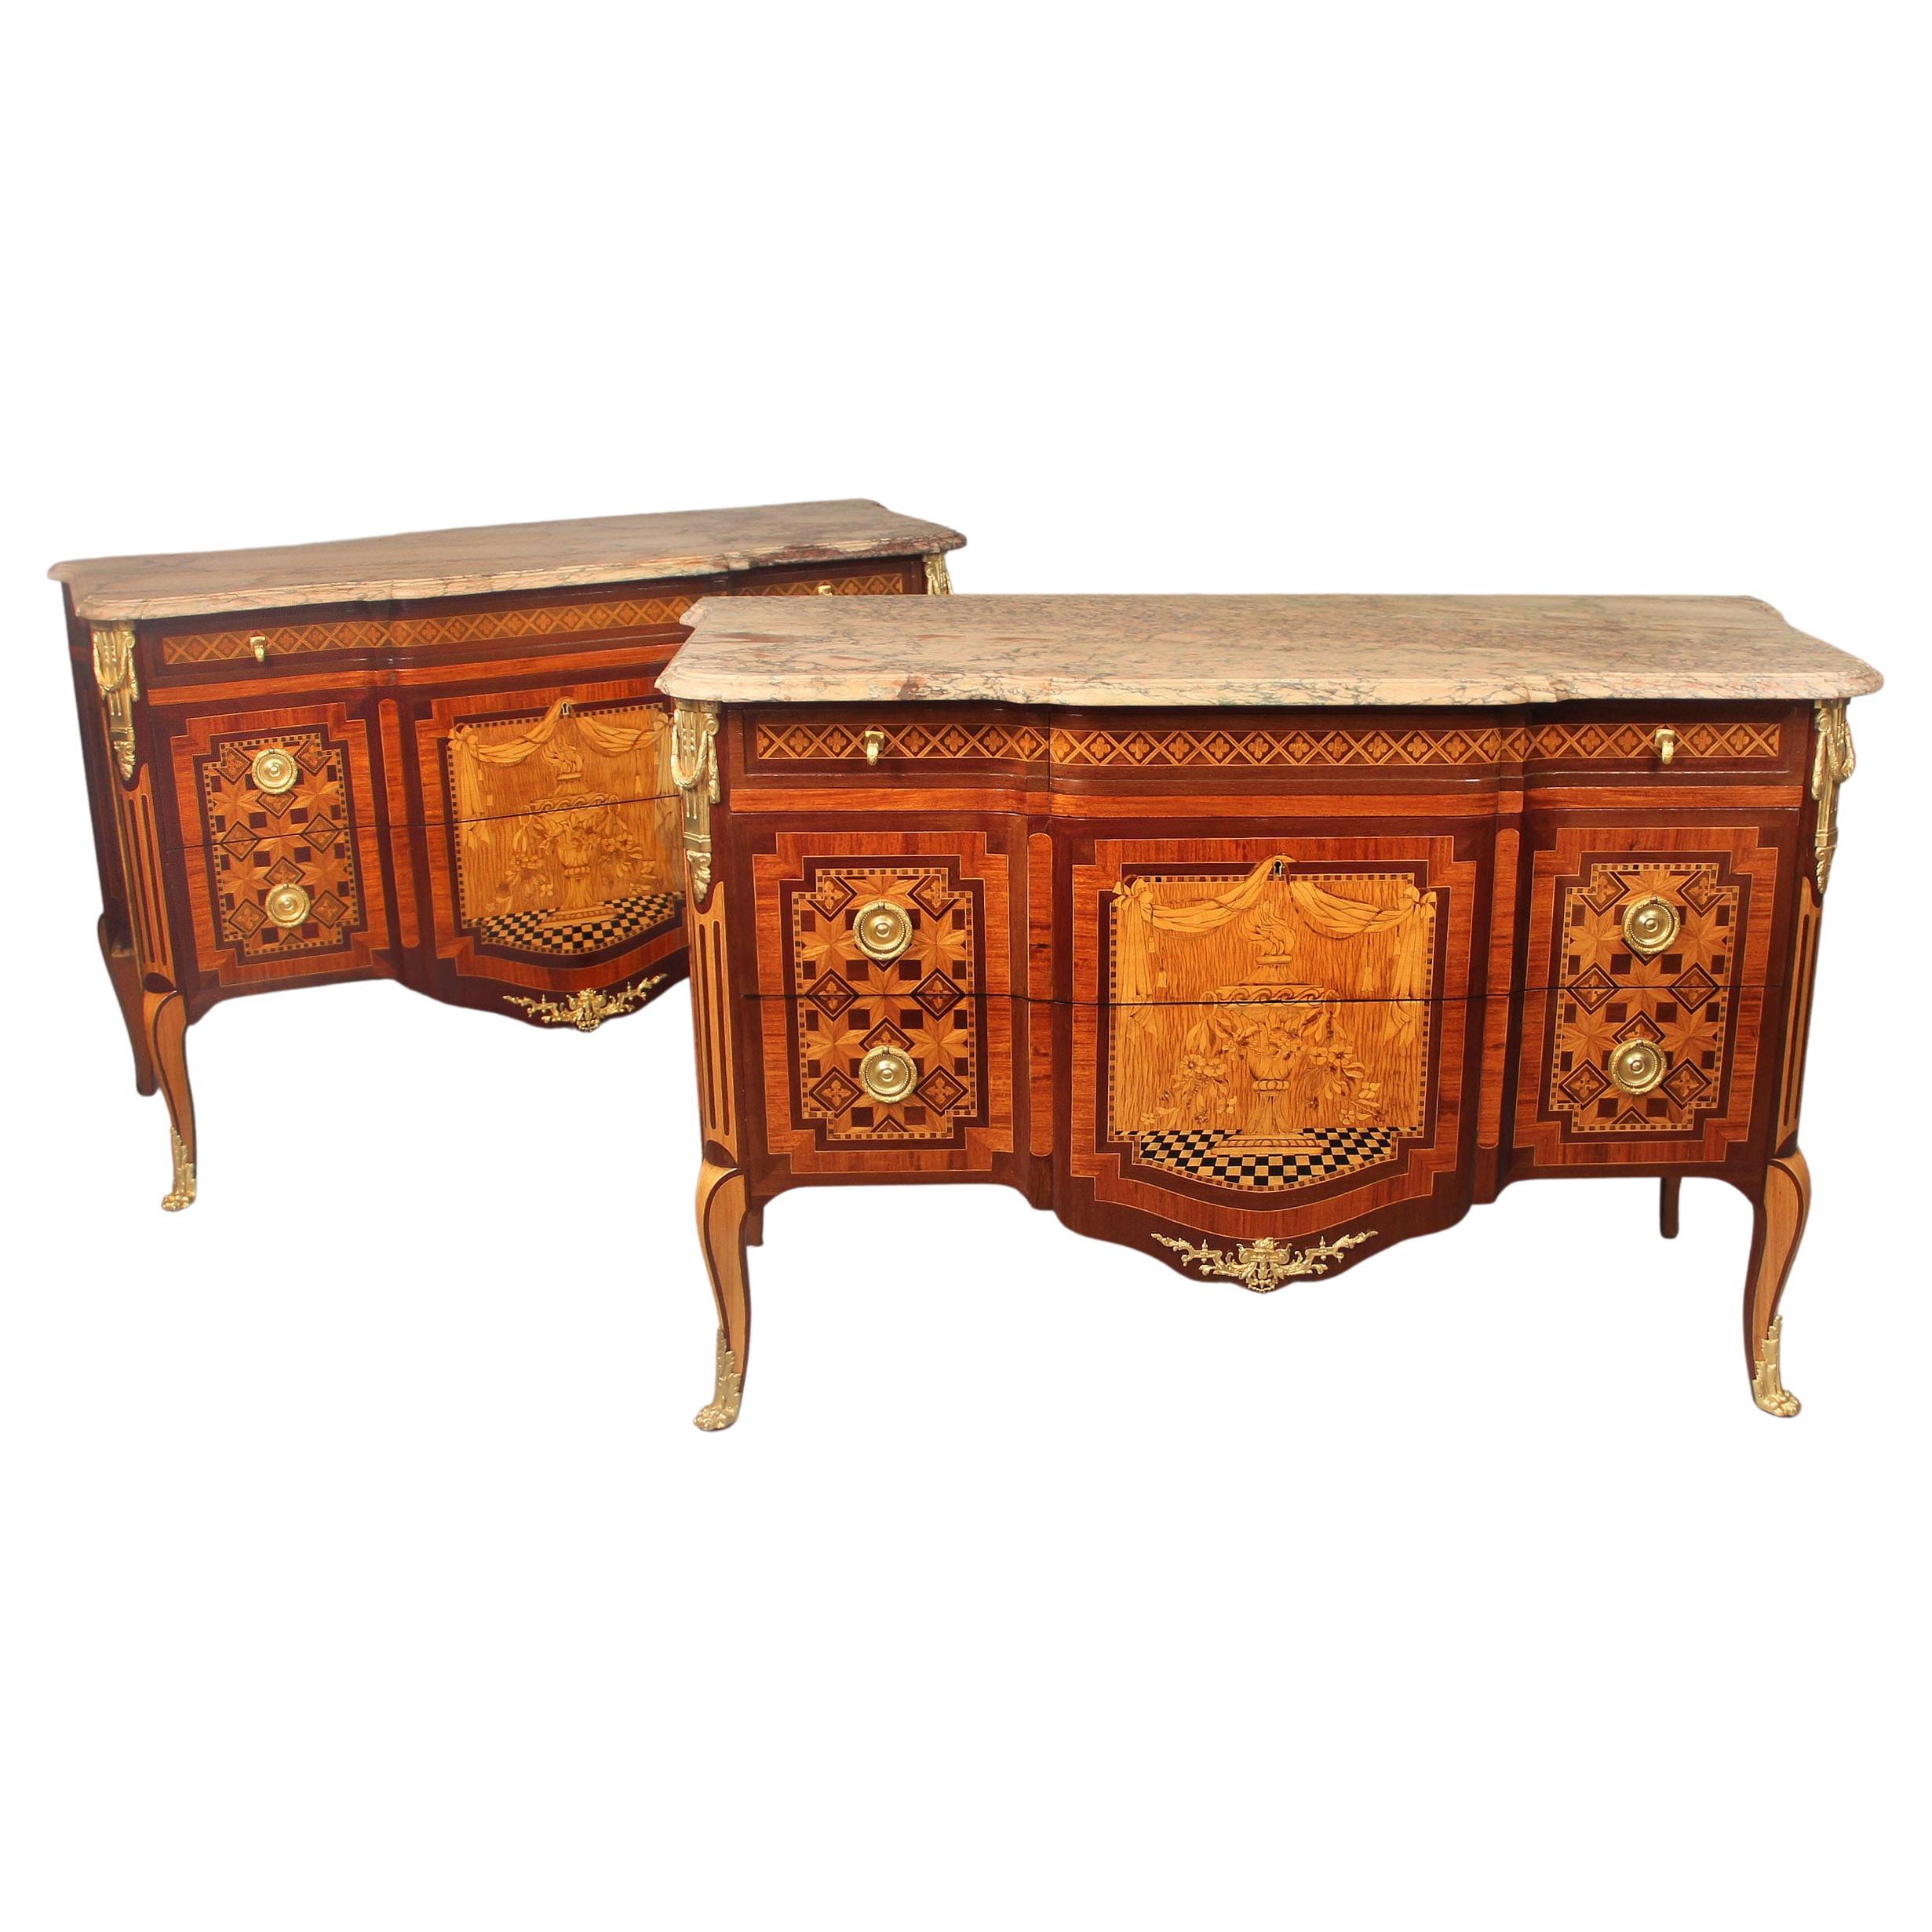 Fantastic Pair of Early 20th Century Gilt Bronze Mounted Inlaid Commodes For Sale